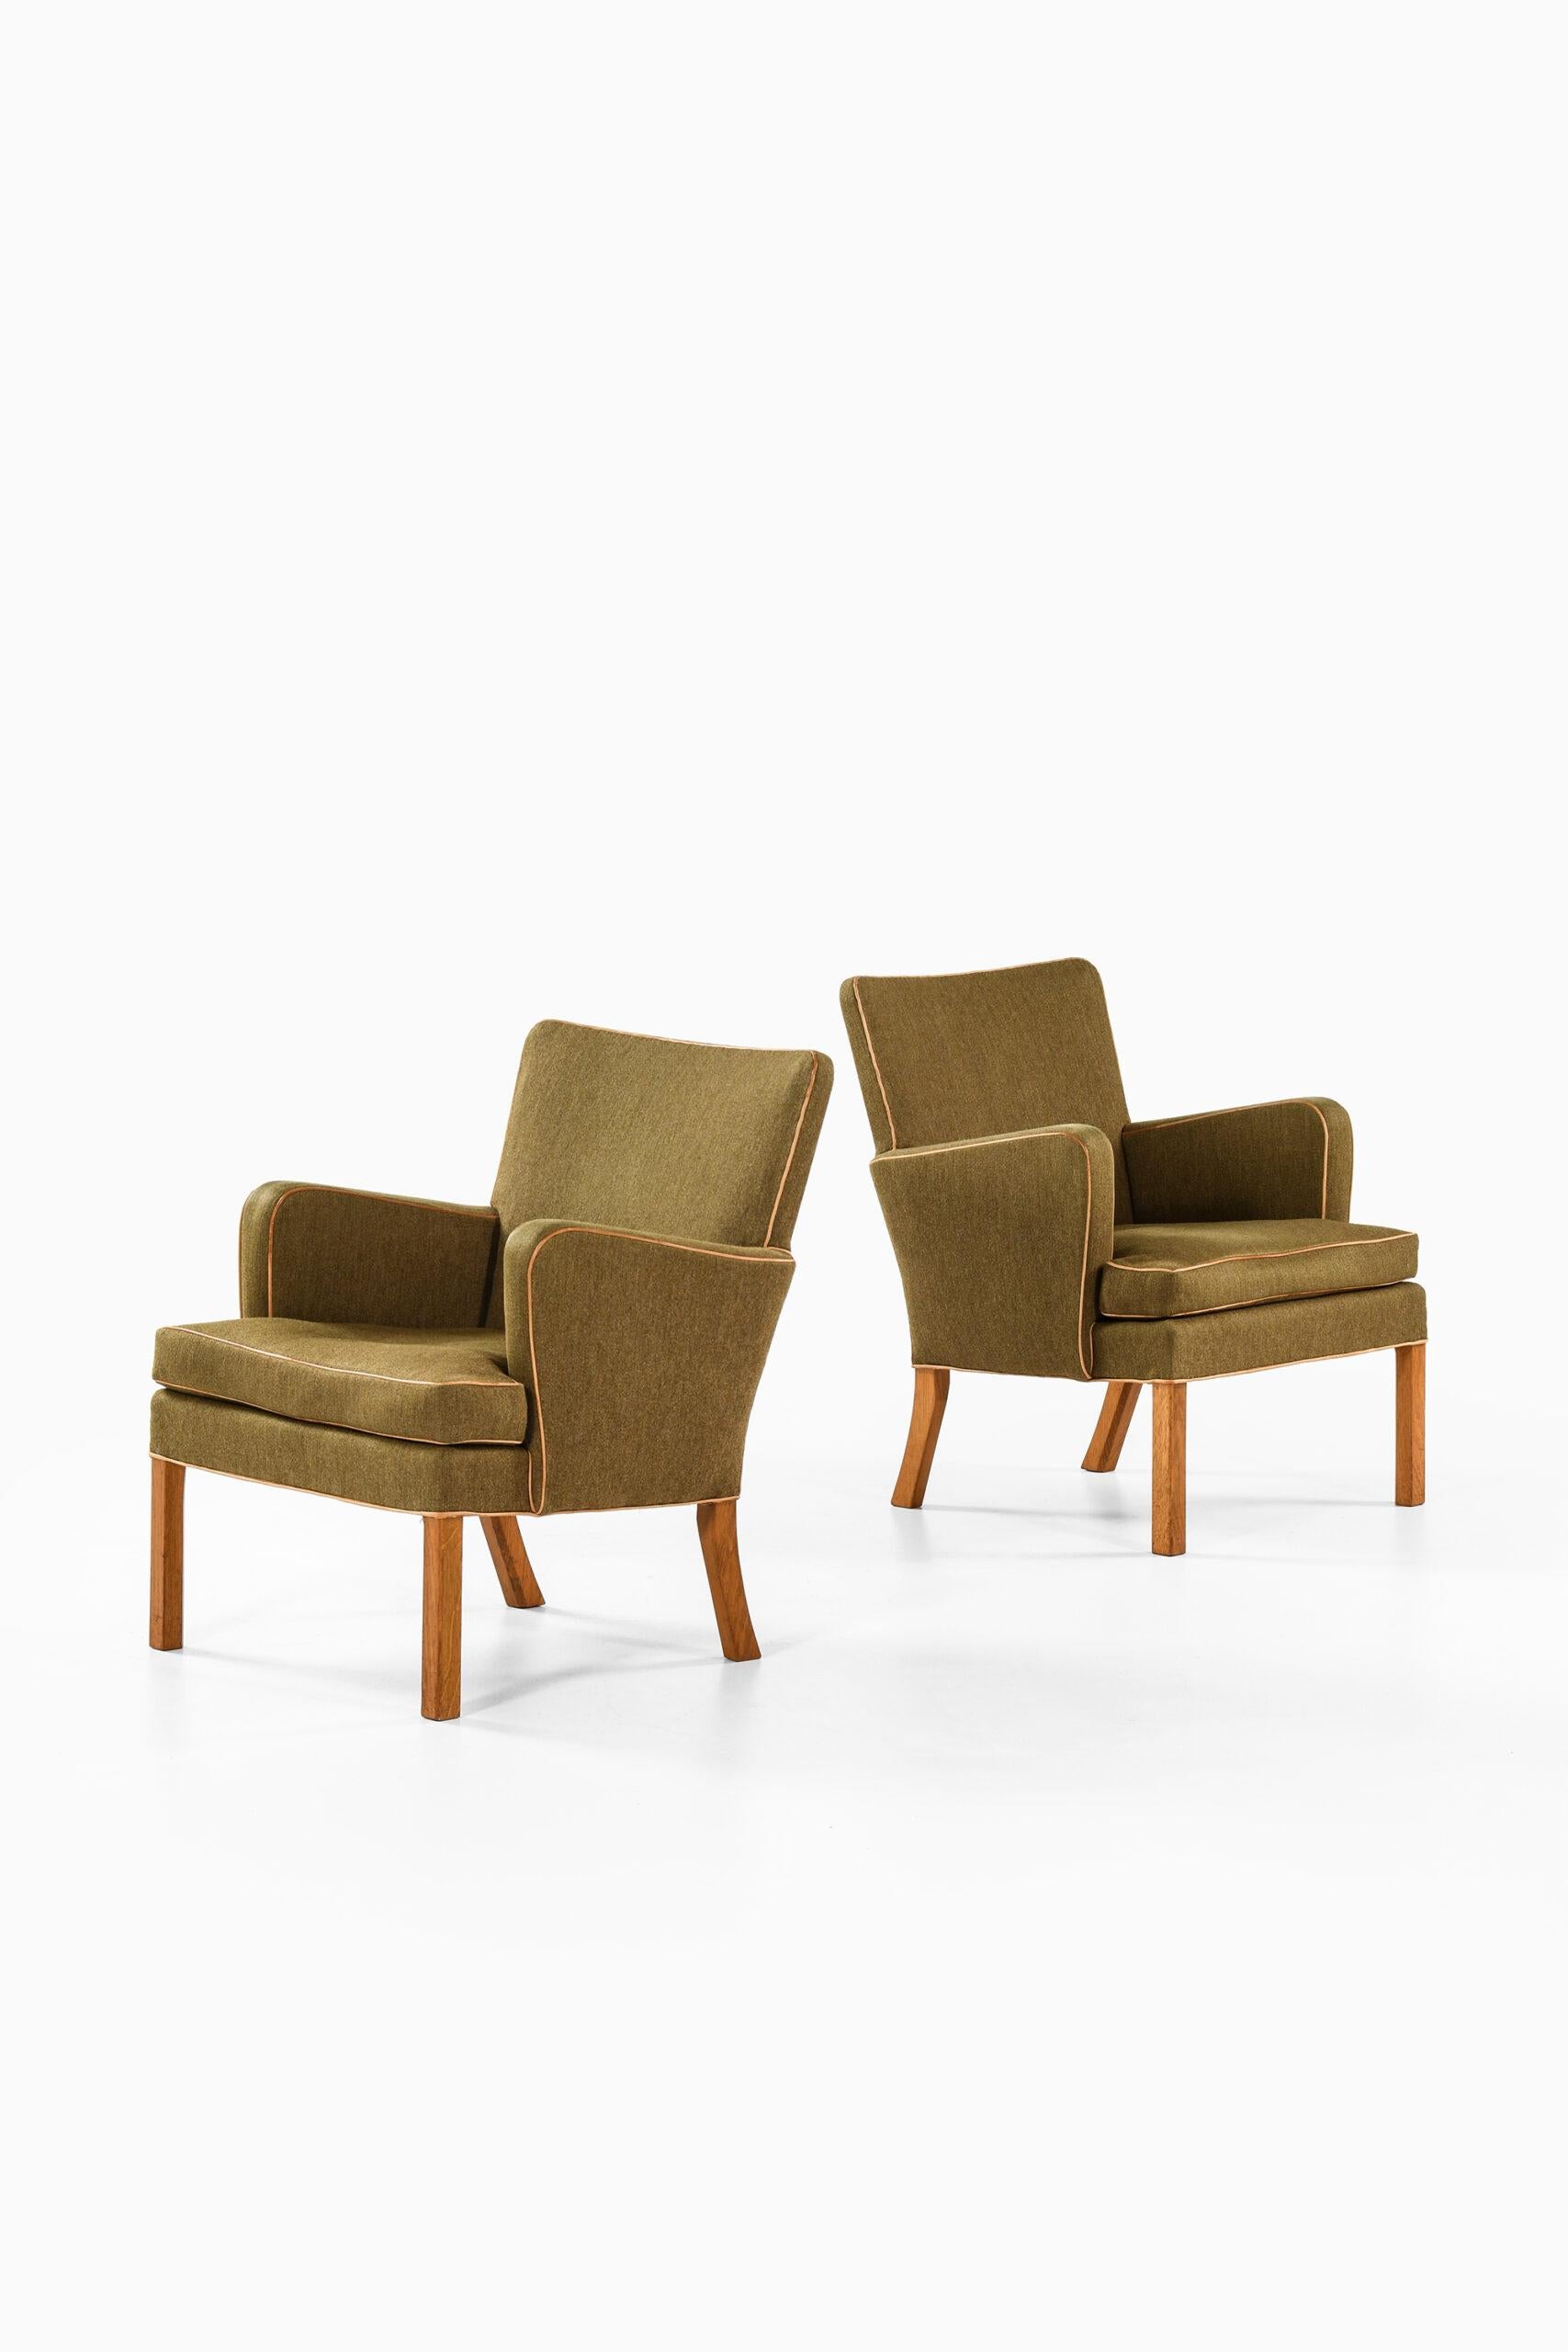 Rare pair of easy chairs model 5313 designed by Kaare Klint. Produced by cabinetmaker Rud Rasmussen in Denmark.